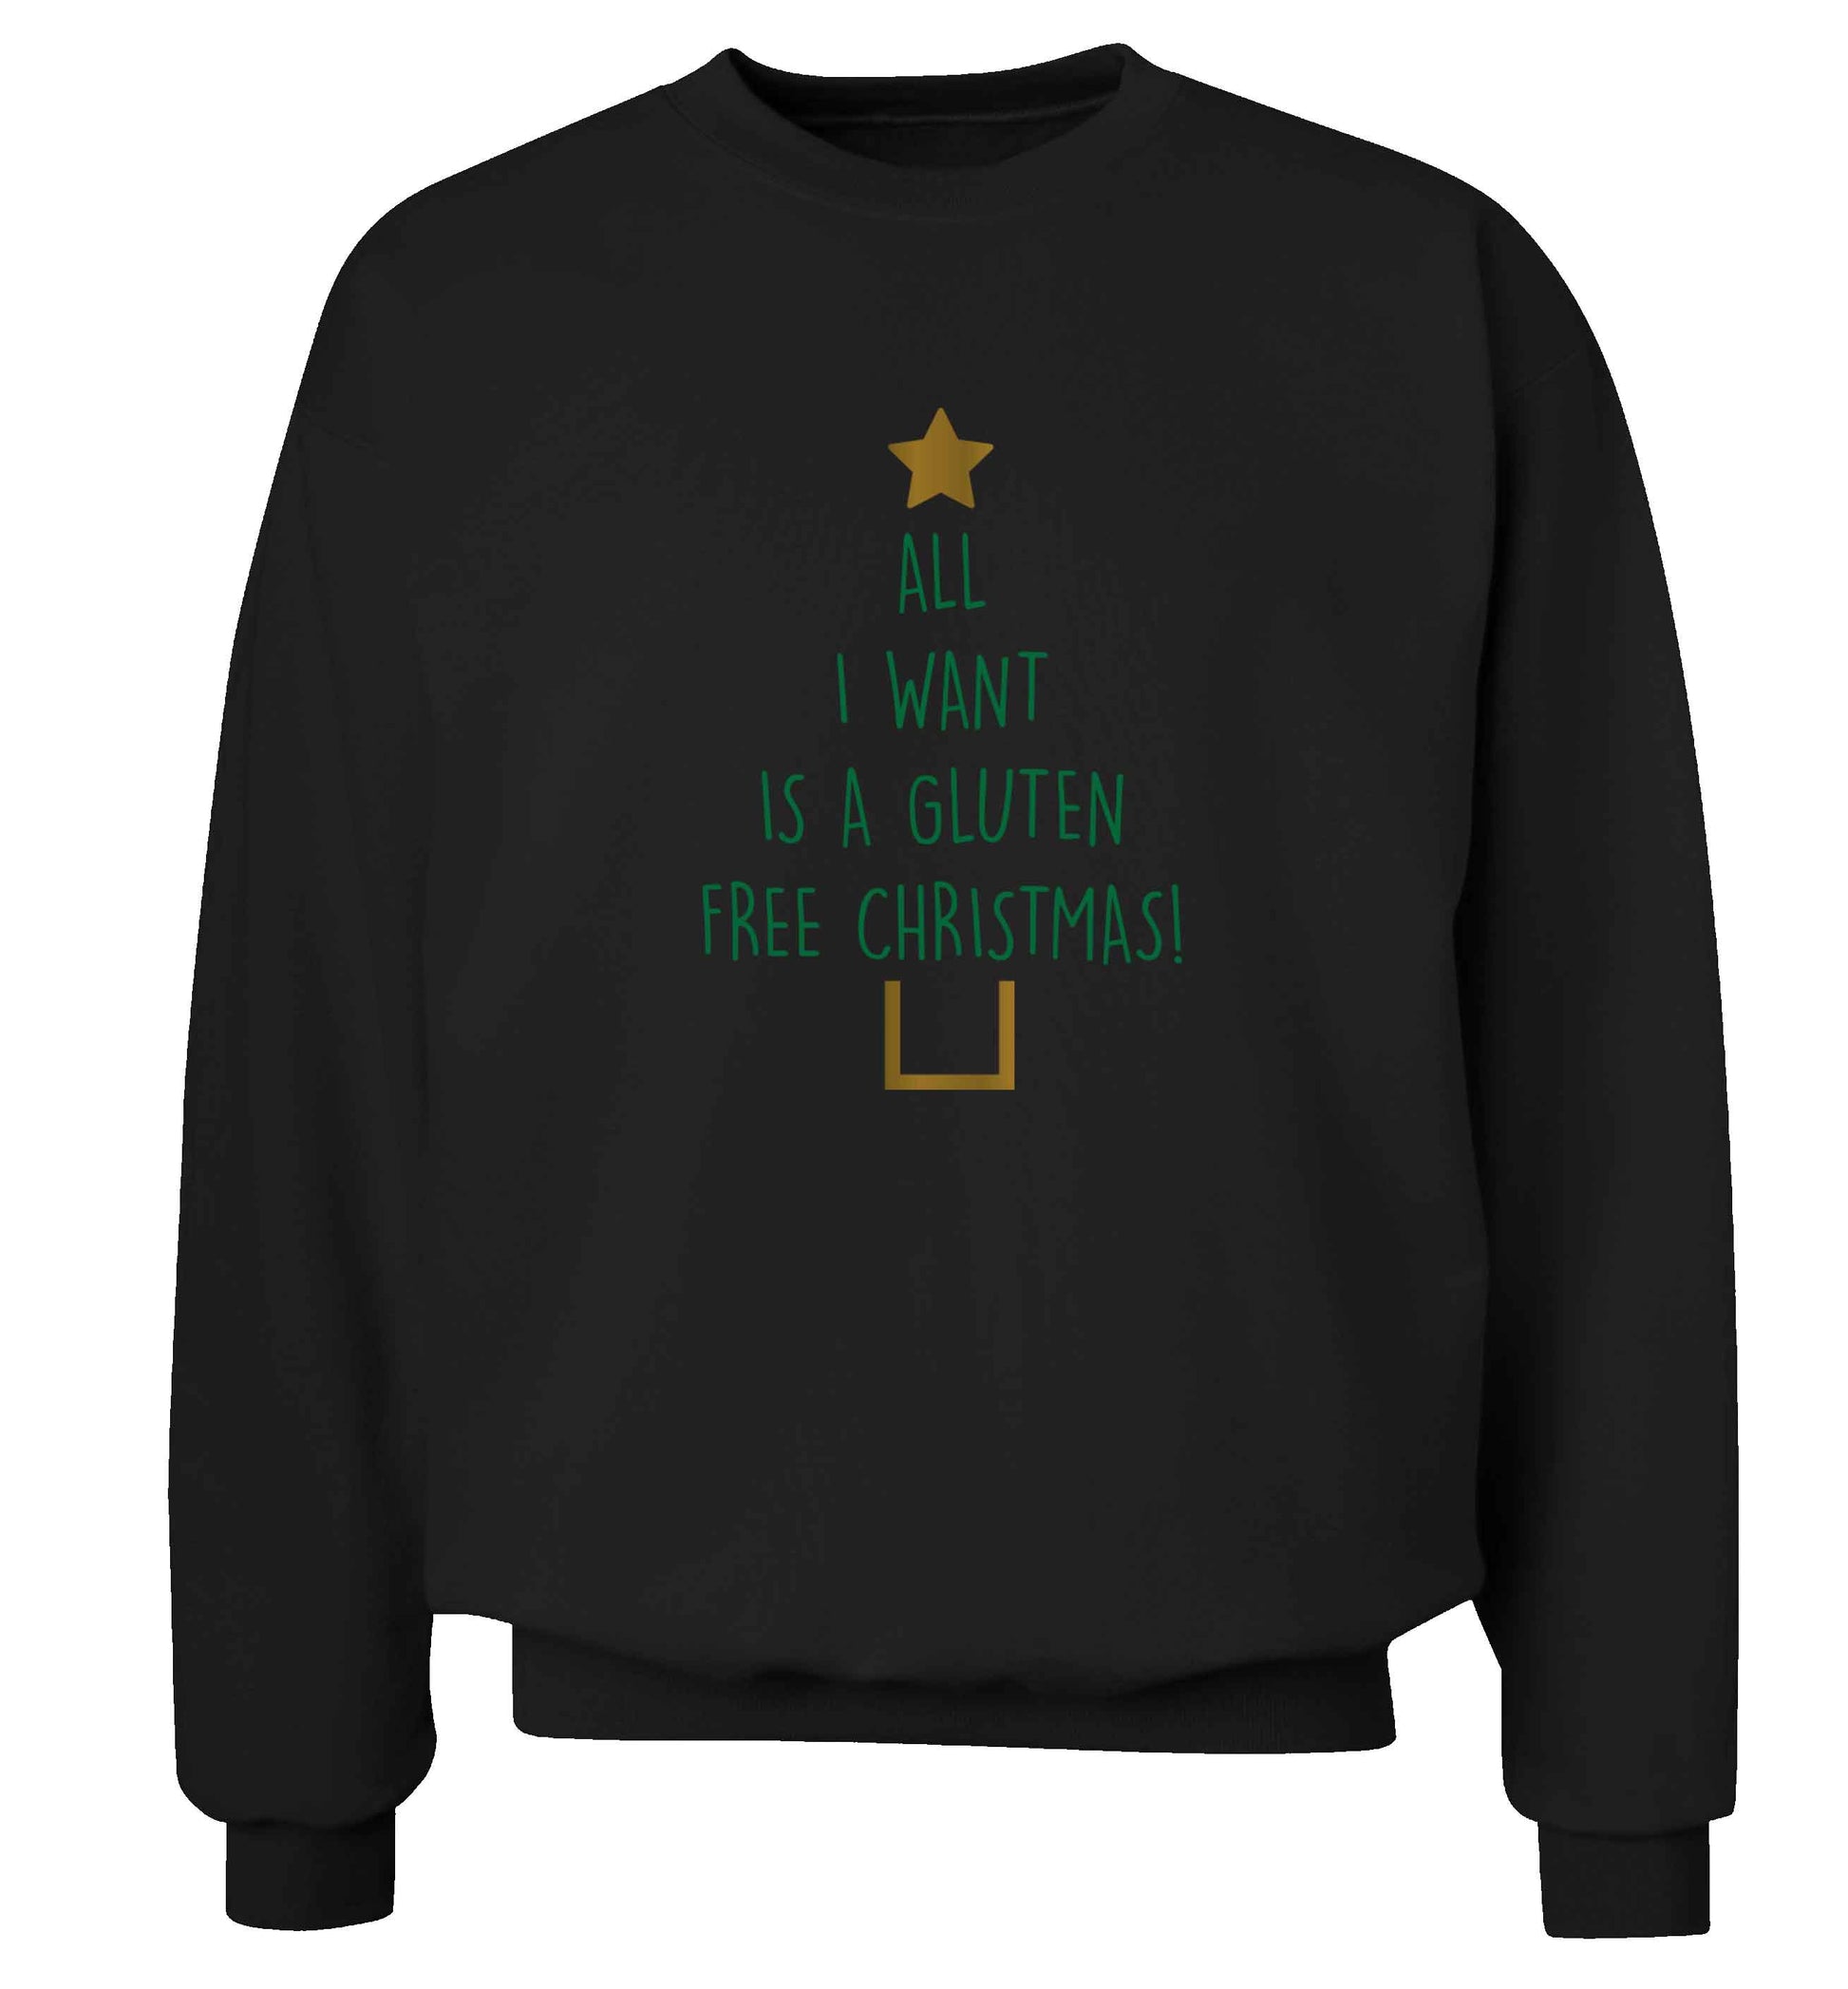 All I want is a gluten free Christmas Adult's unisex black Sweater 2XL